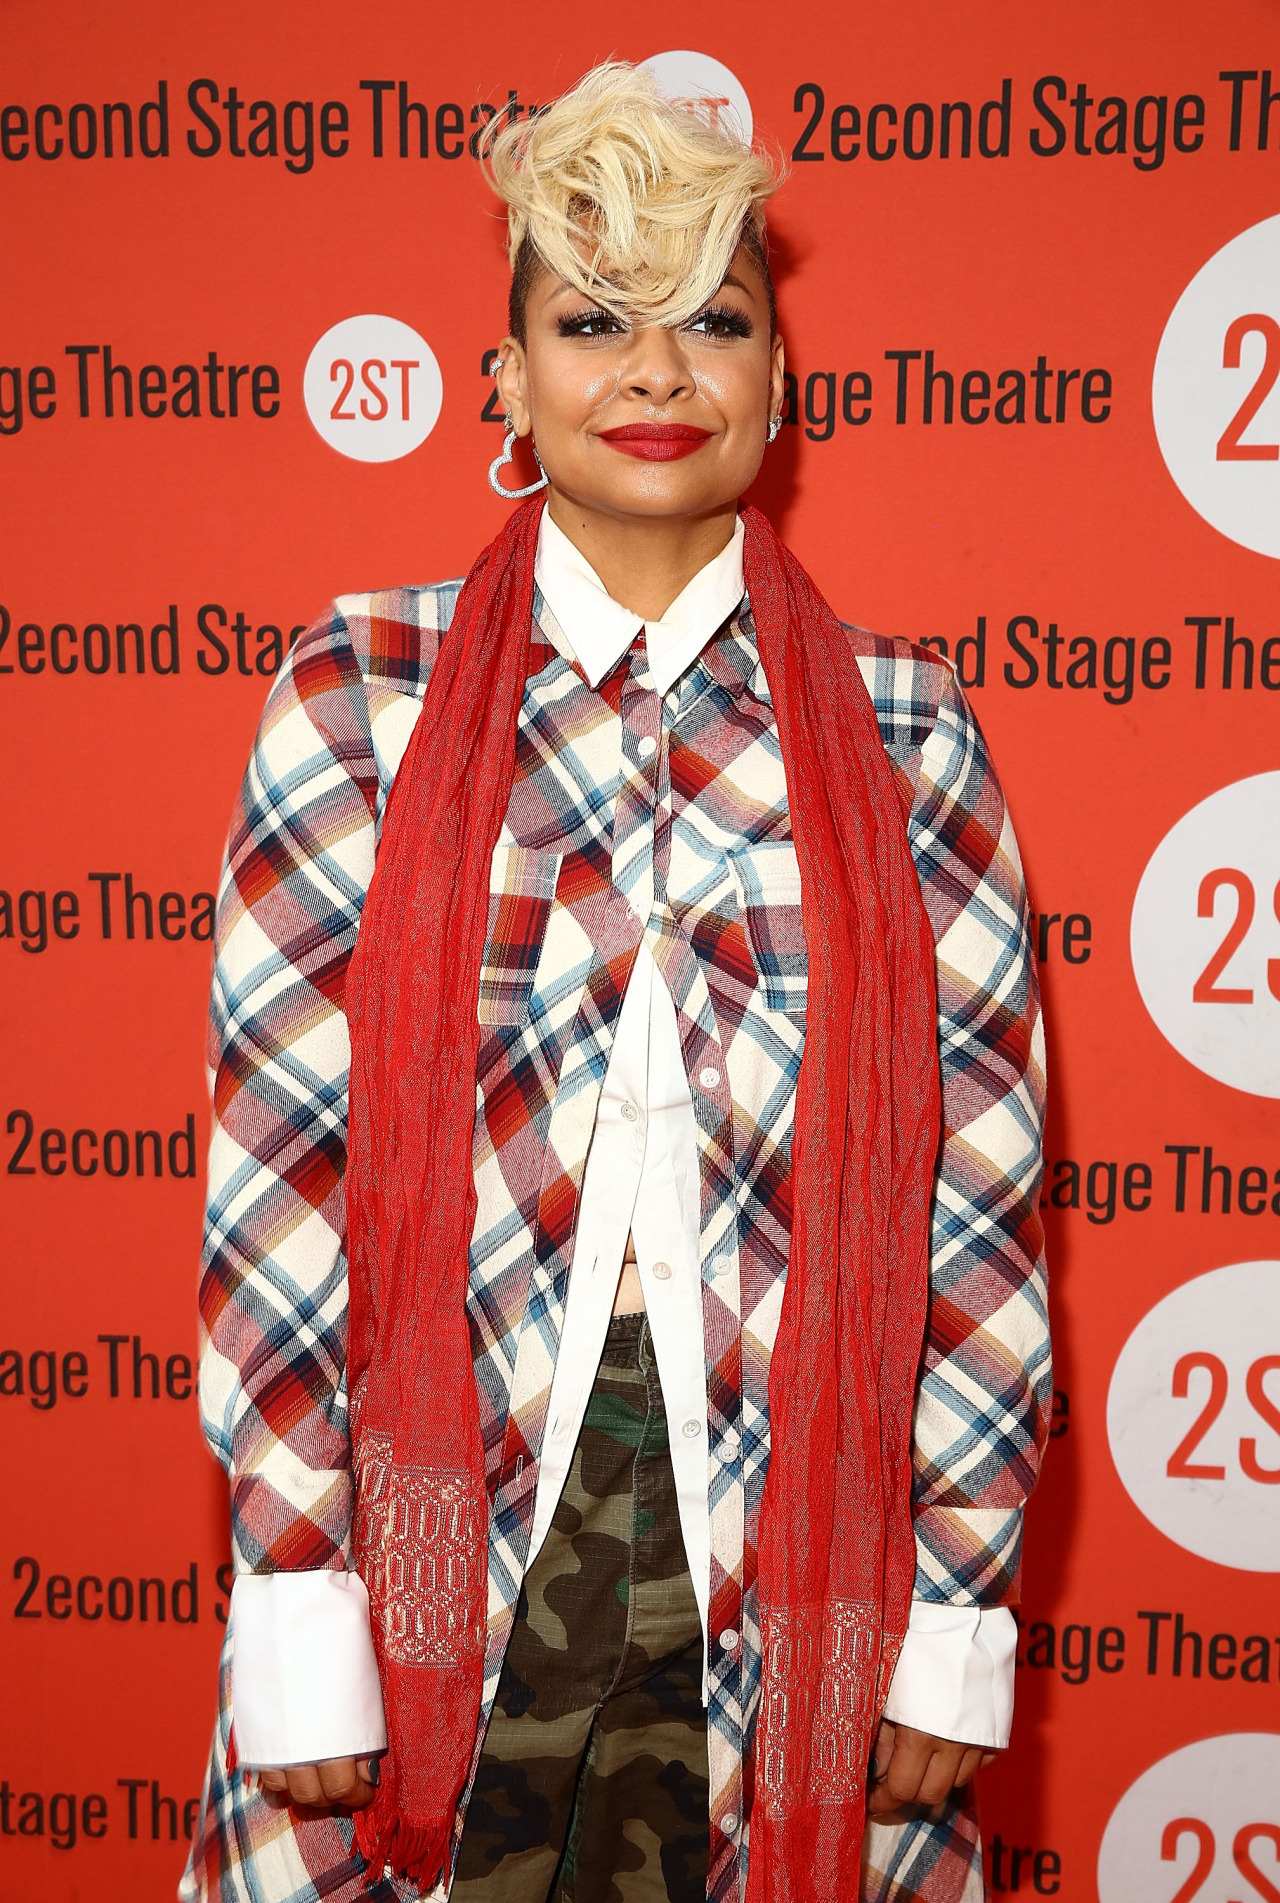 celebritiesofcolor:

Raven Symone attends ‘The Way We Get By’ opening night arrivals at Second Stage Theatre on May 19, 2015 in New York City